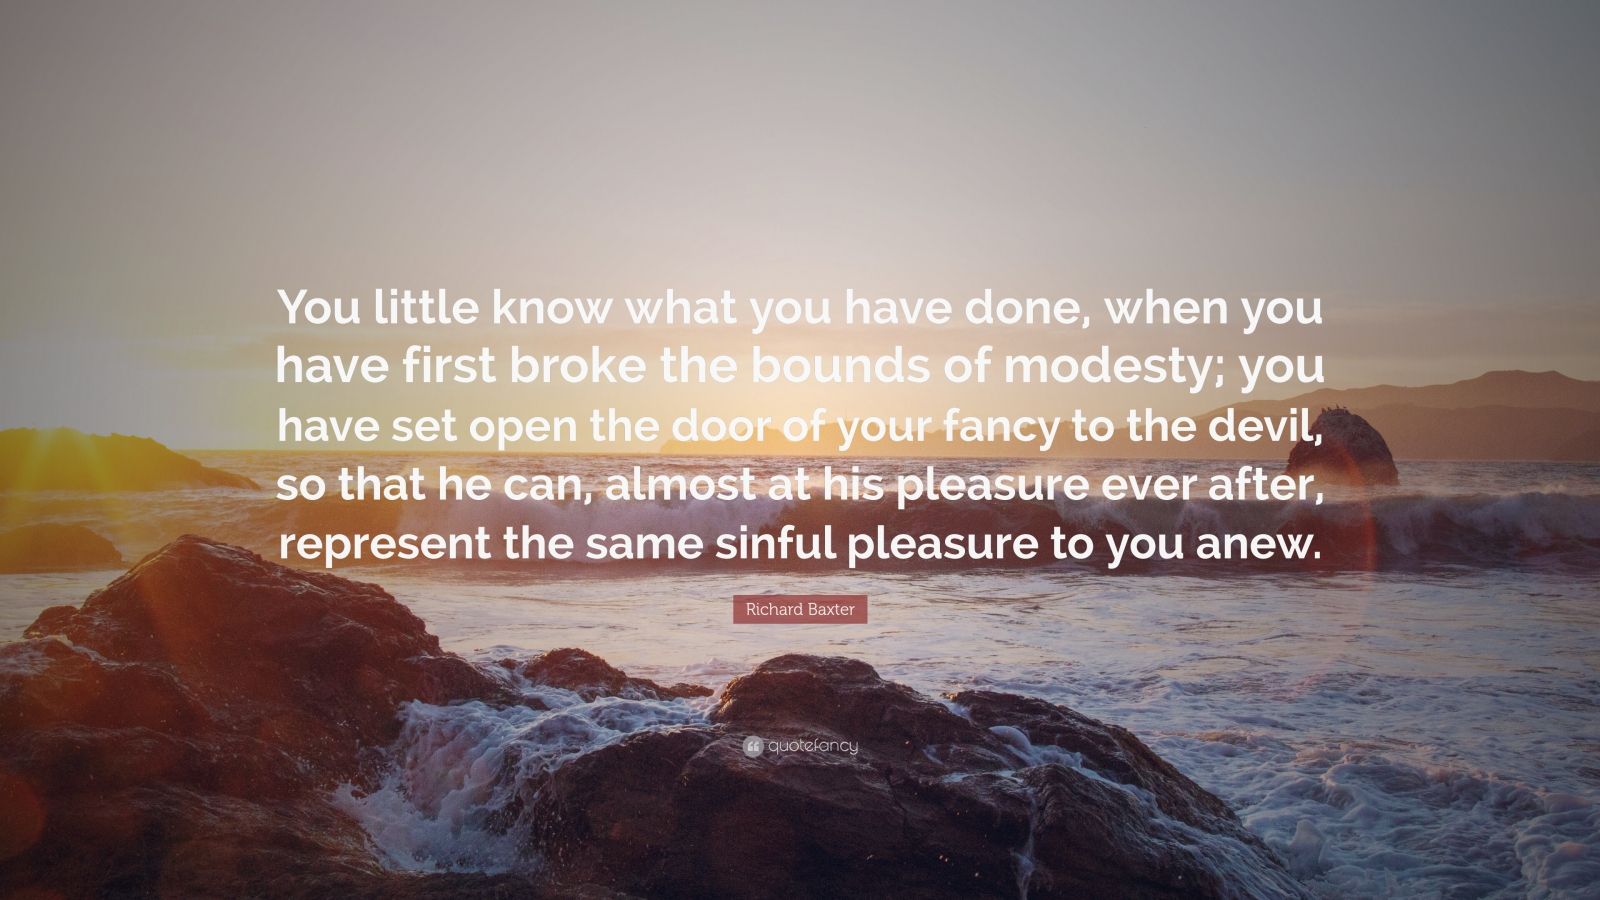 Richard Baxter Quote: “You little know what you have done, when you ...